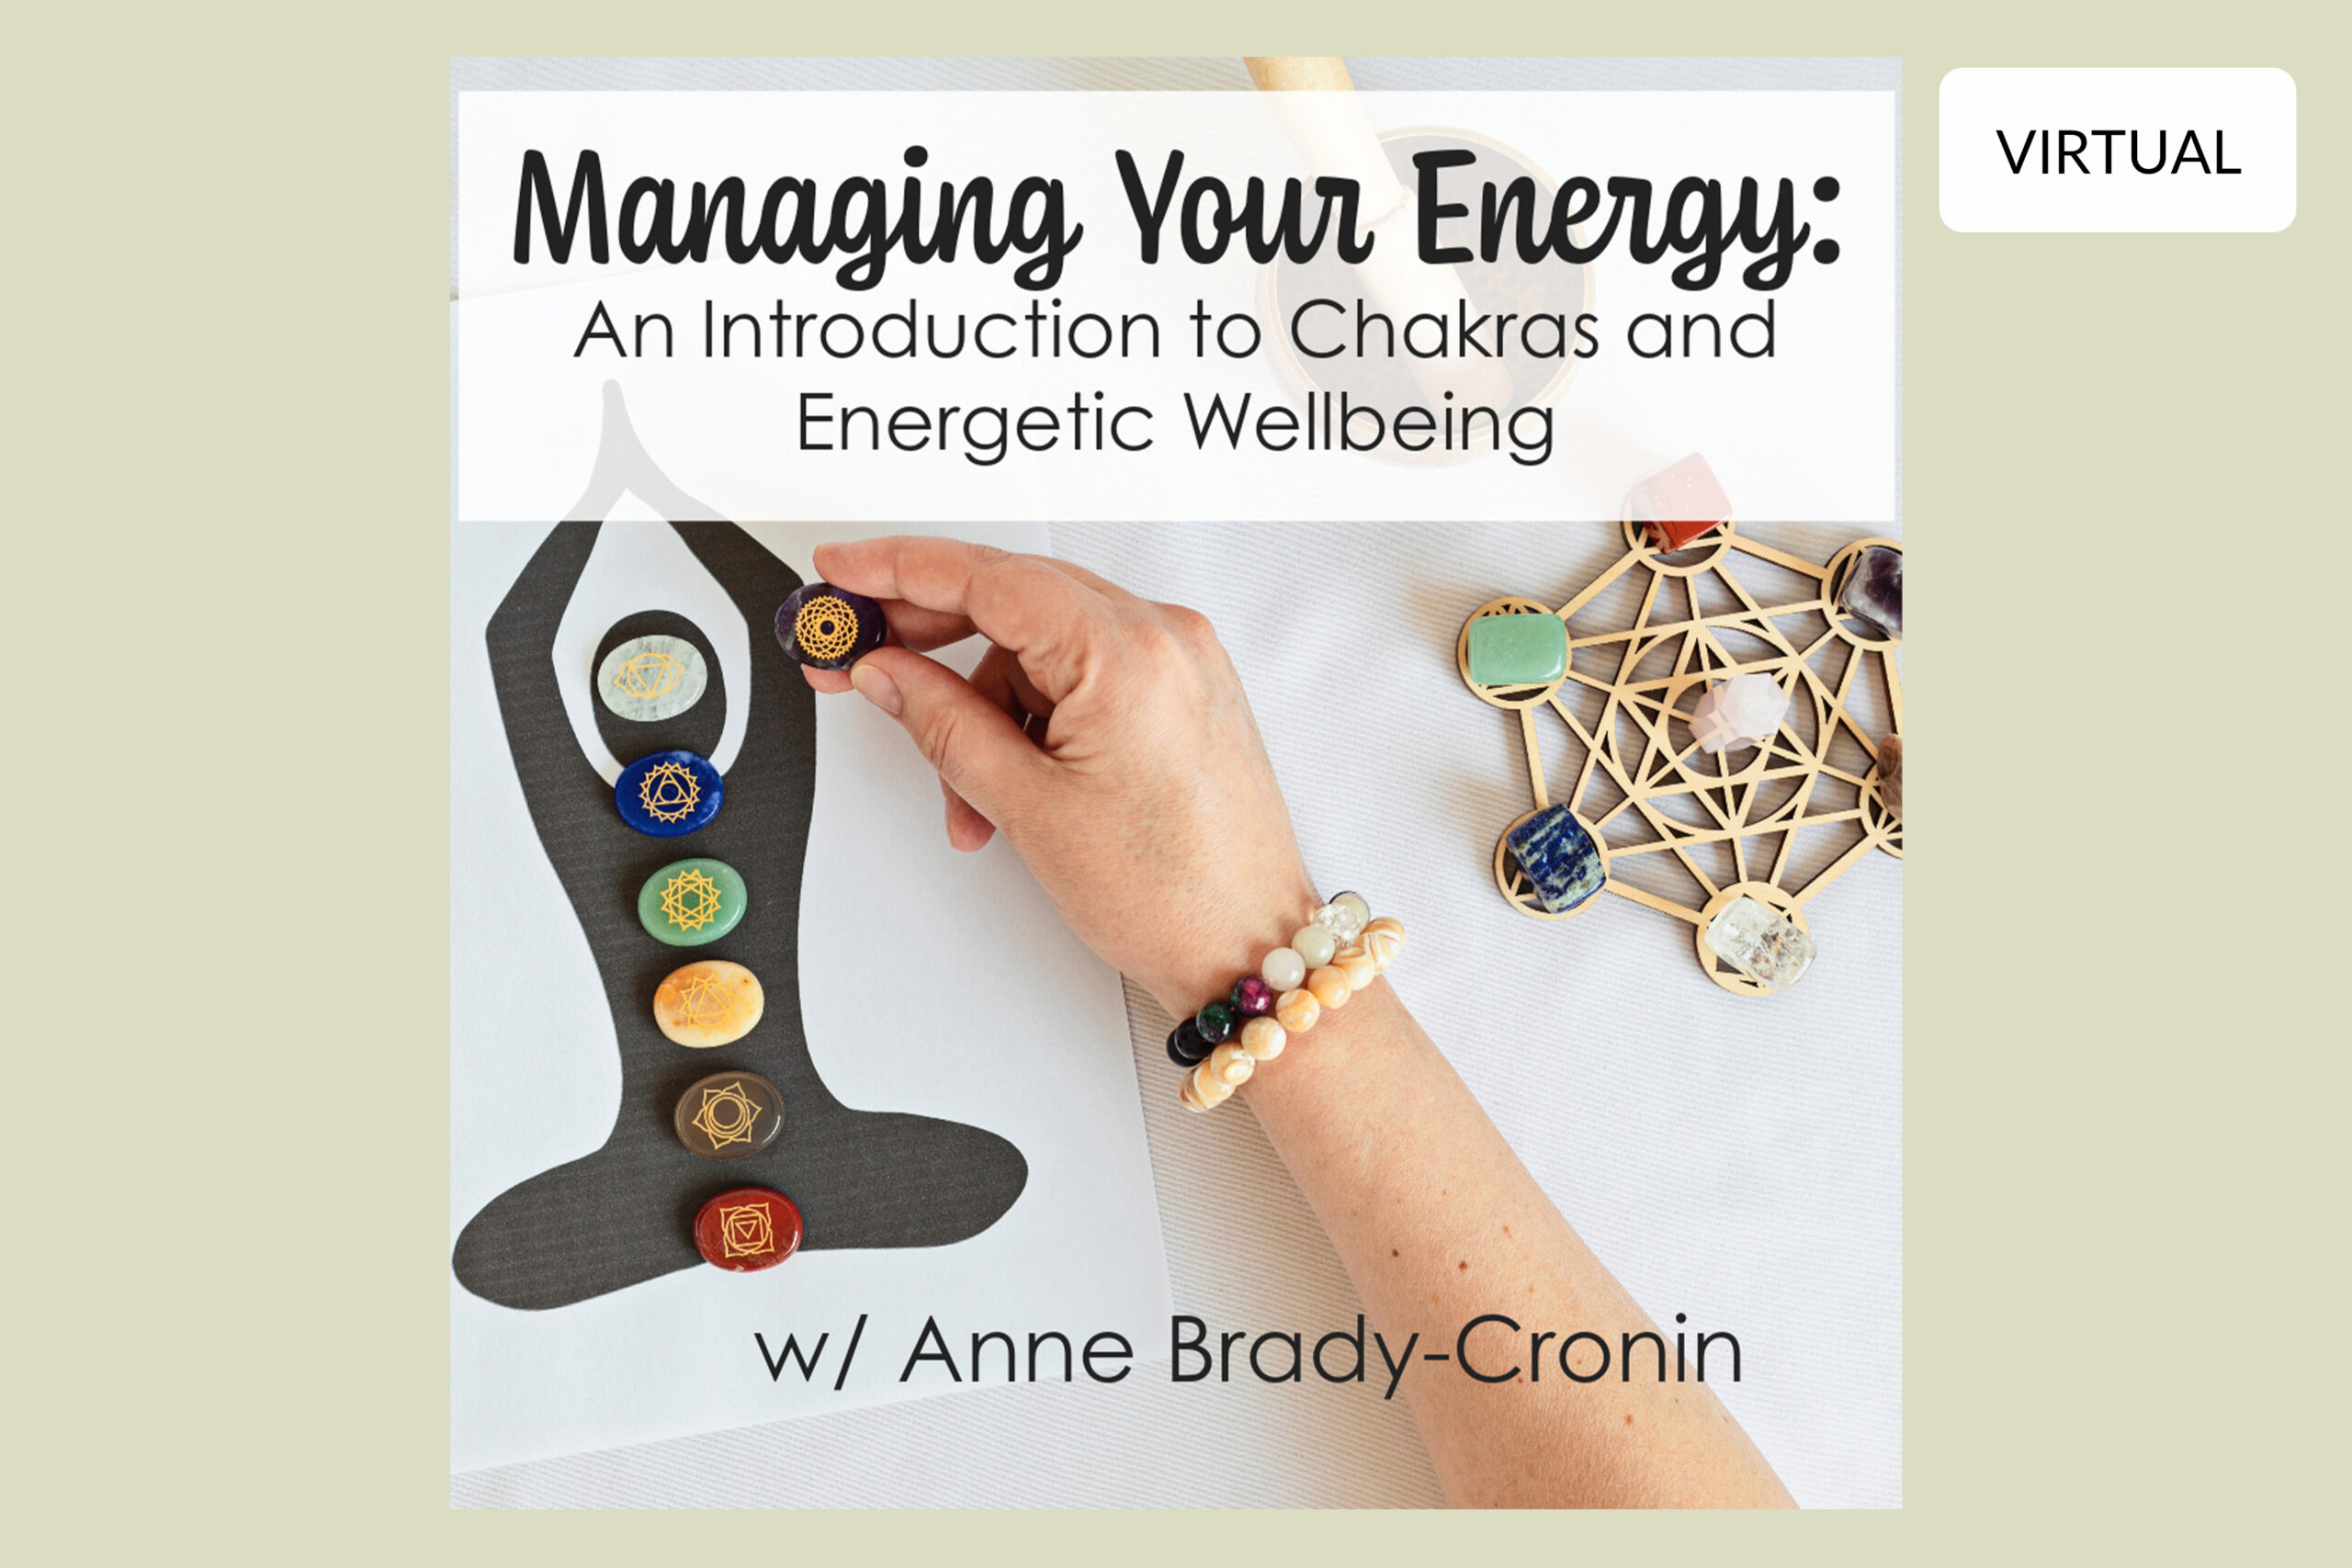 Featured image for “Managing Your Energy: An Introduction to Chakras and Energetic Wellbeing”